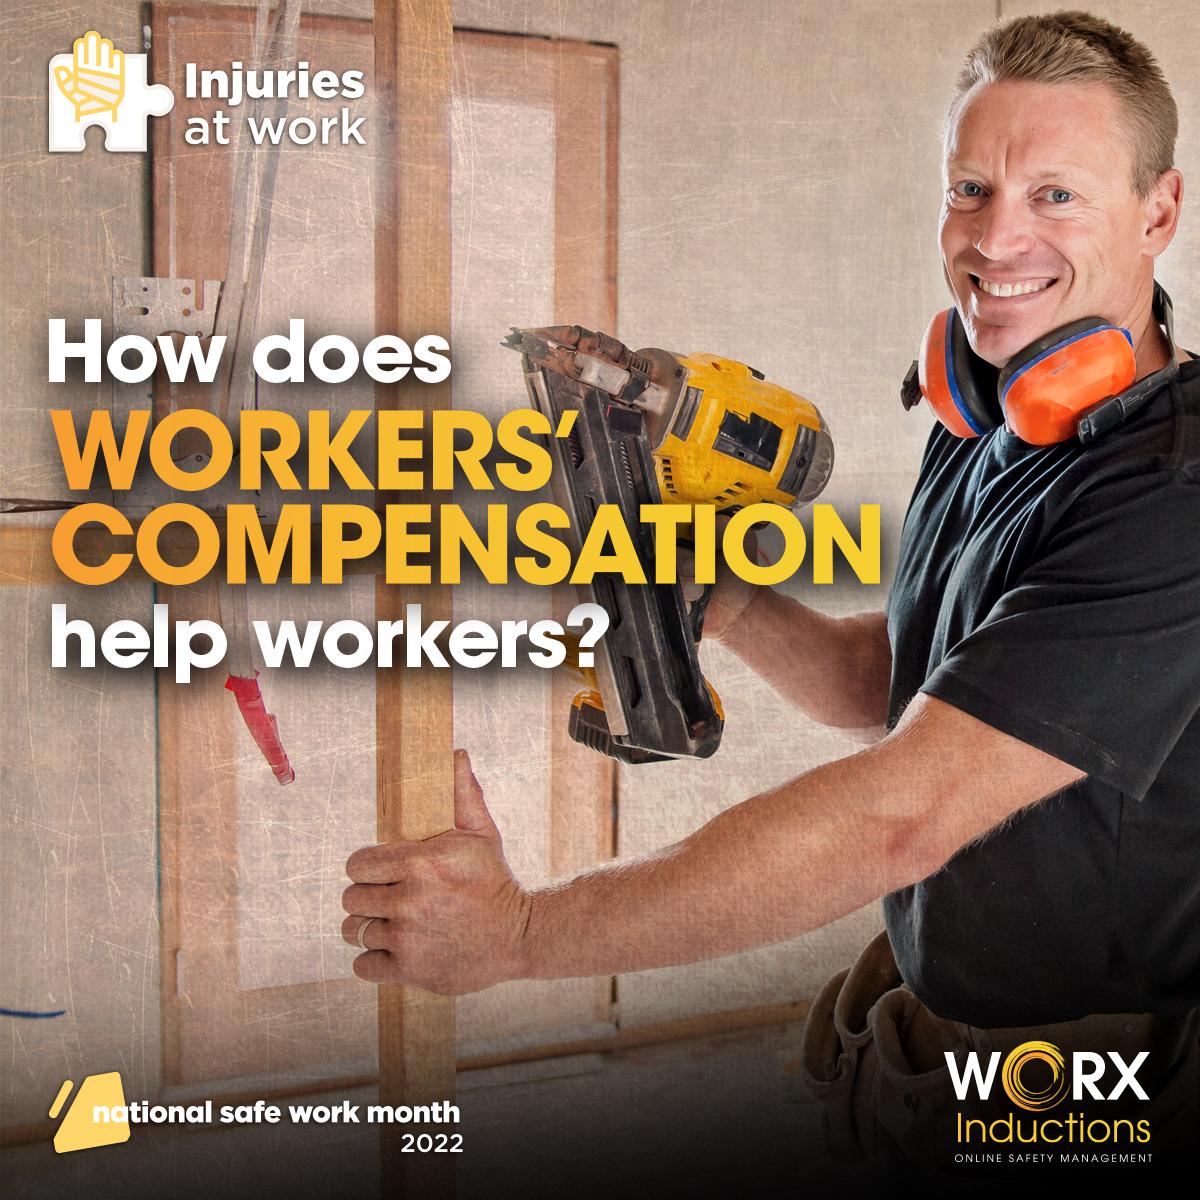 How does Workers’ Compensation help workers?